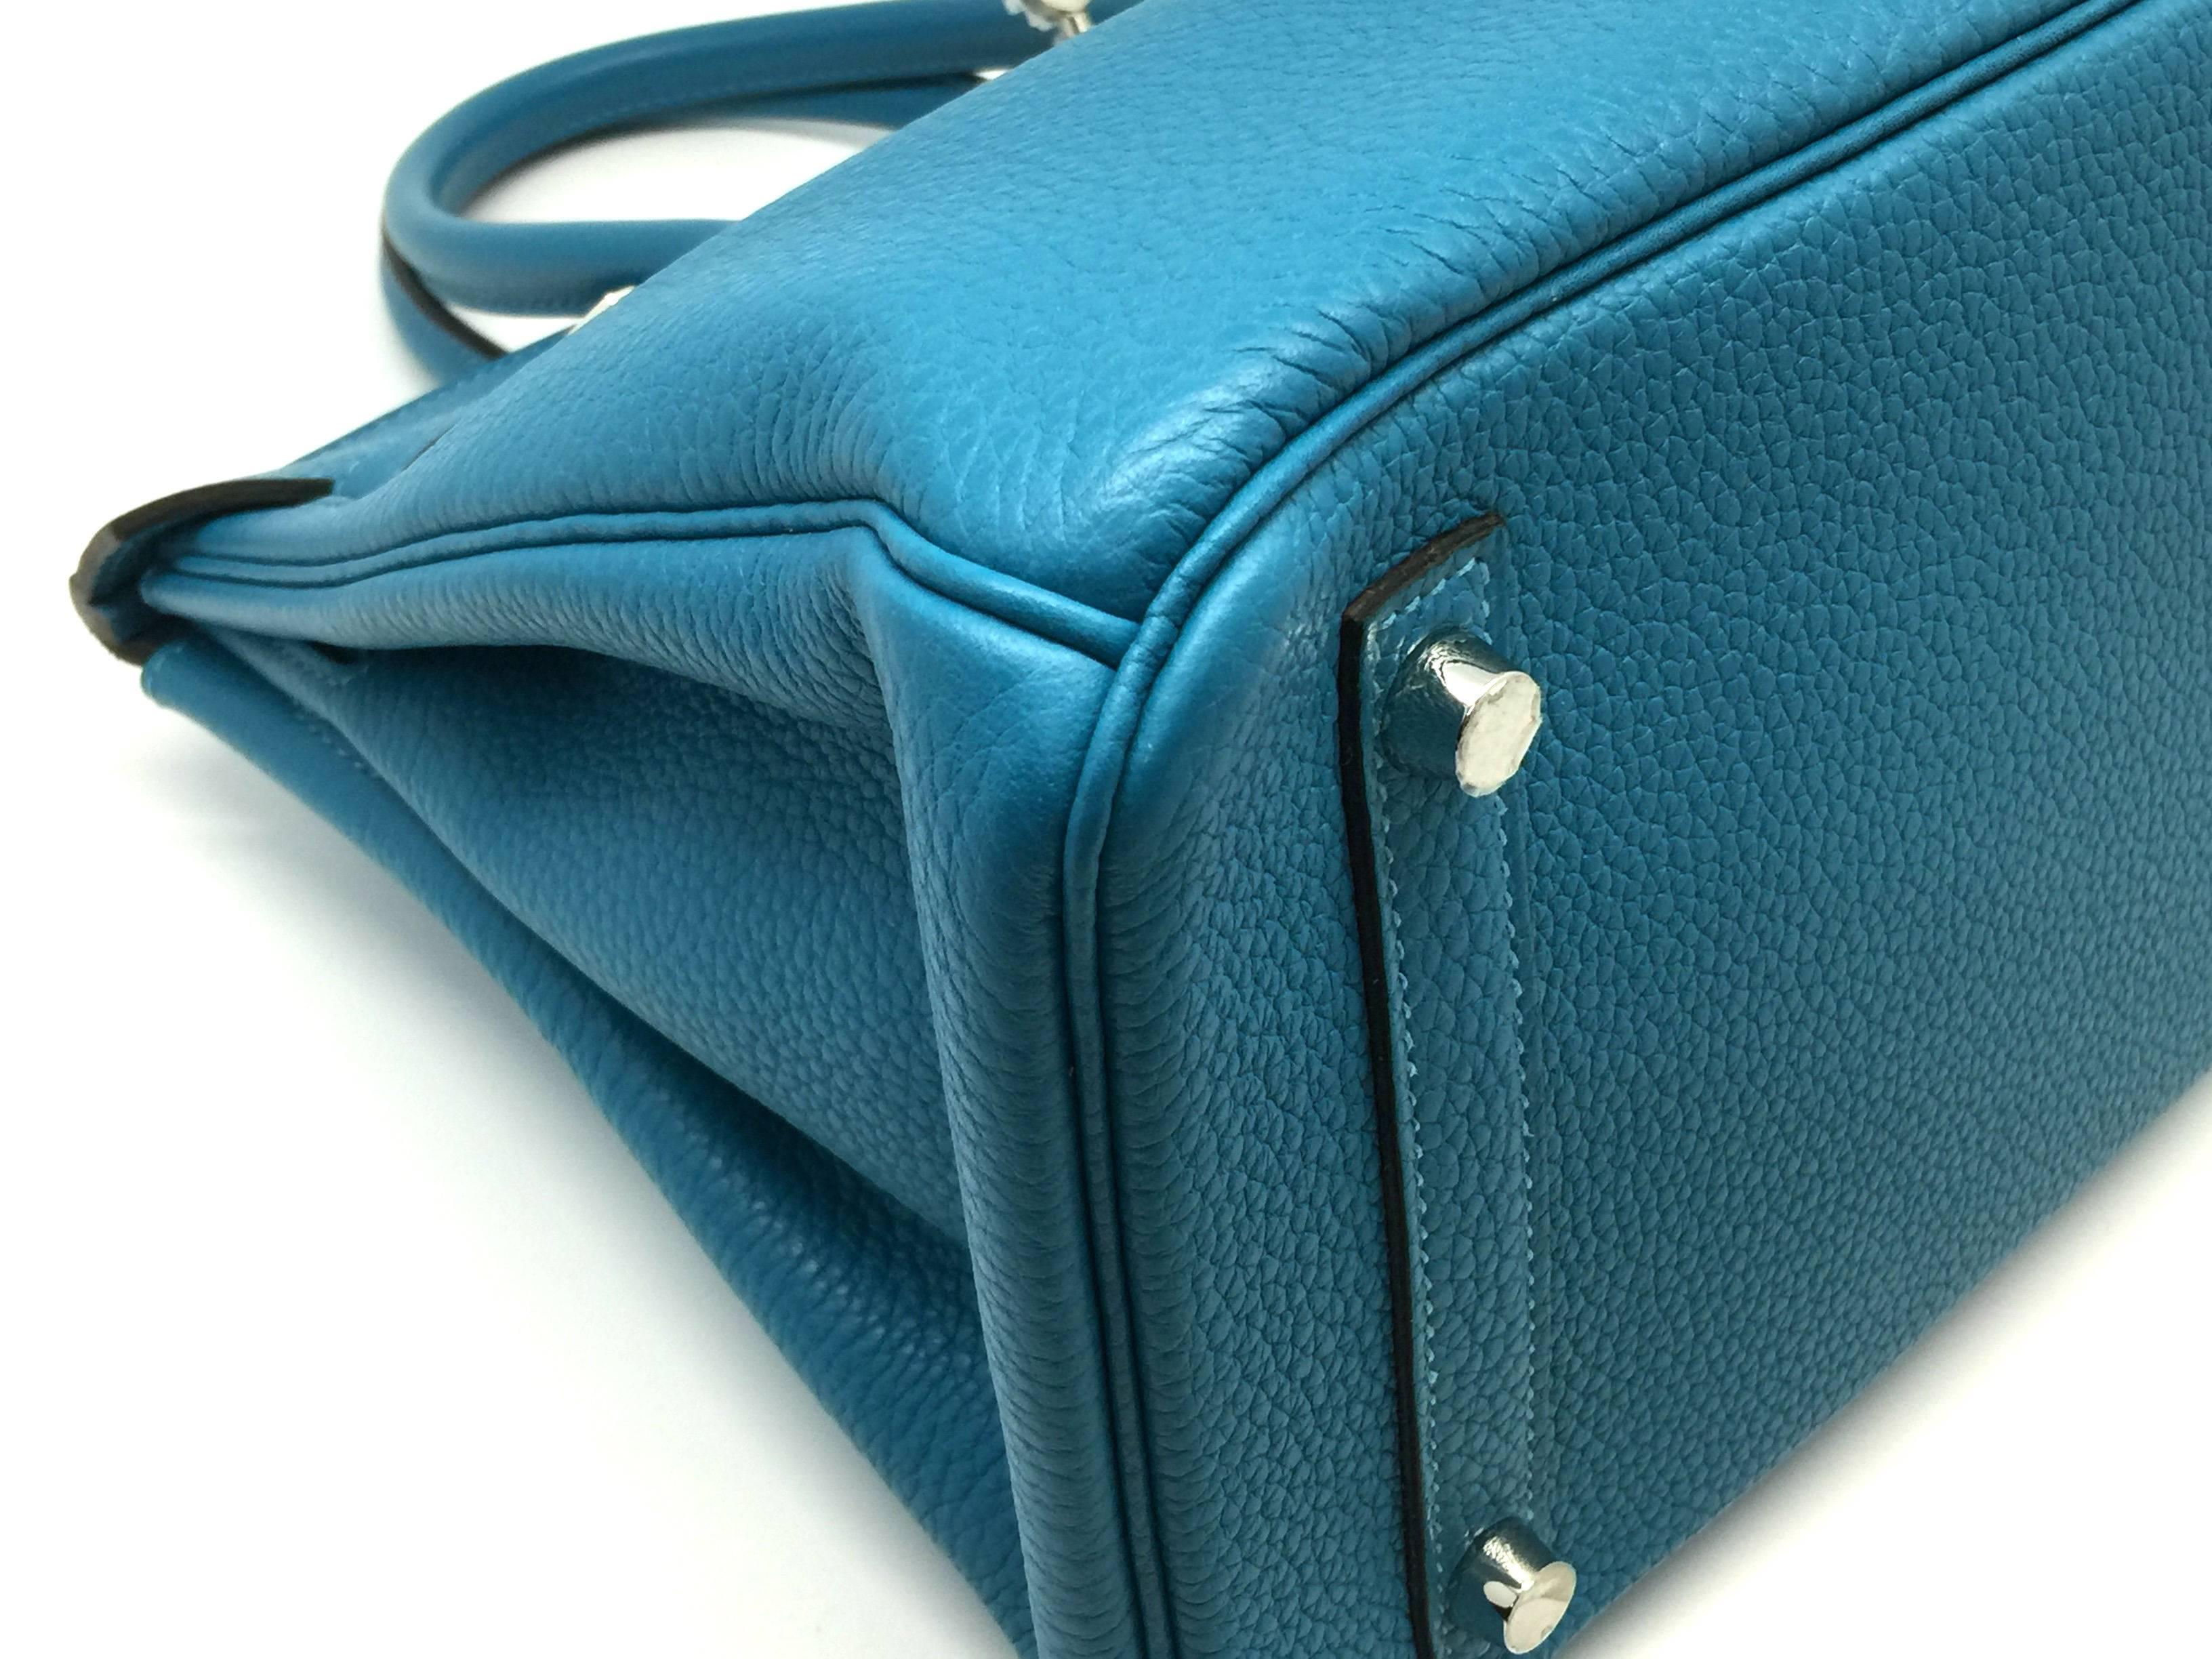 Hermes Birkin 30 Turquoise Blue Clemence Leather SHW Top Handle Bag For Sale 3